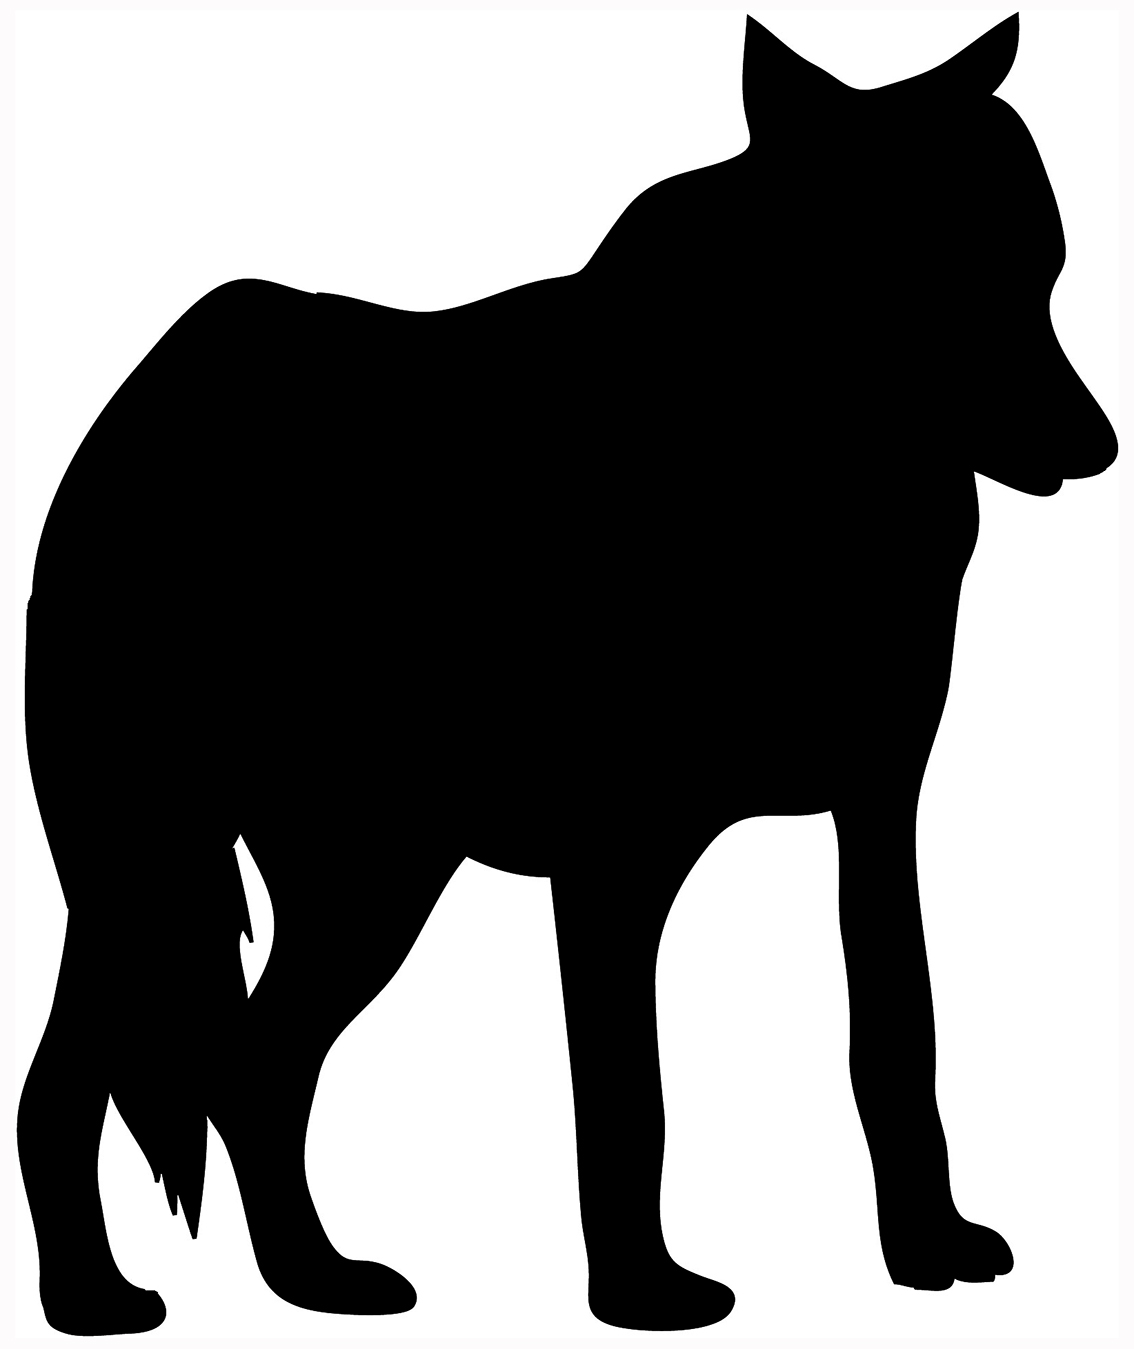 Animal Silhouettes From Our Tattoo Galleries - ClipArt Best ...